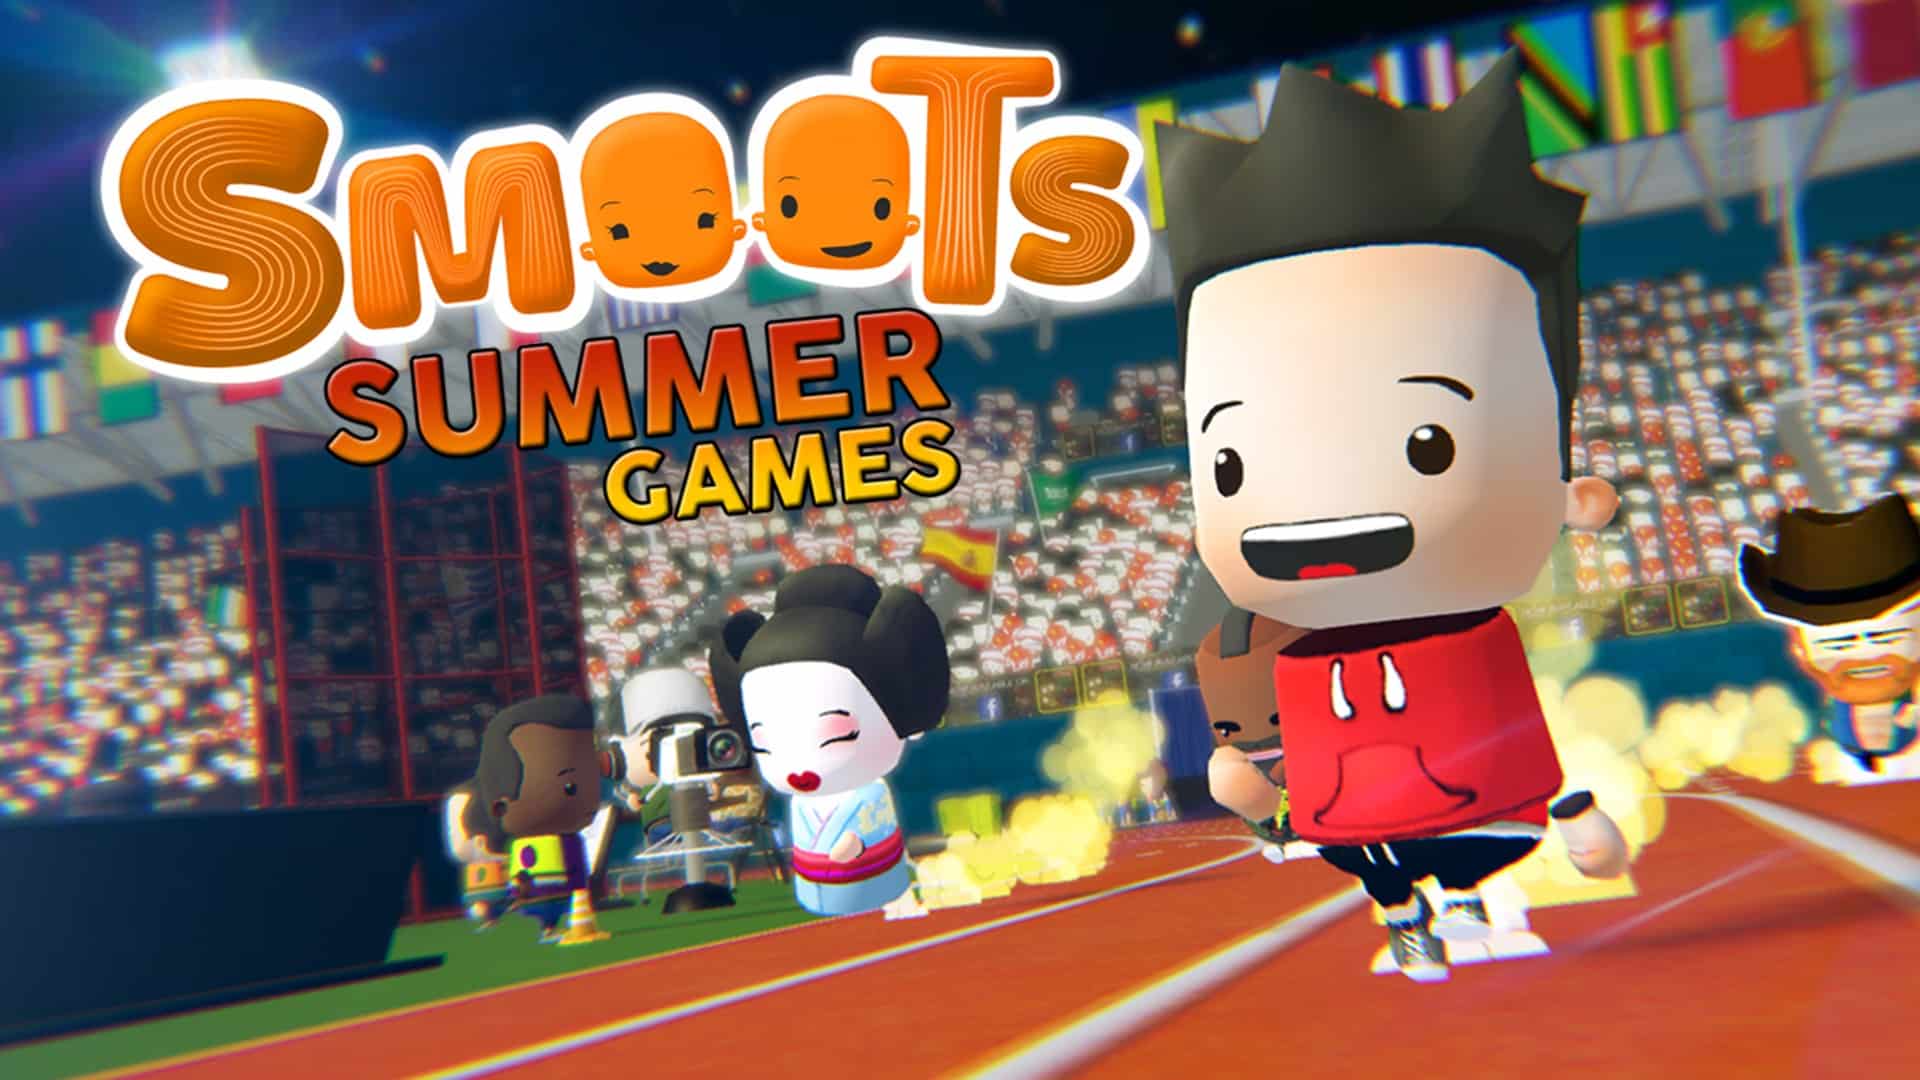 Smoots Summer Games player count stats